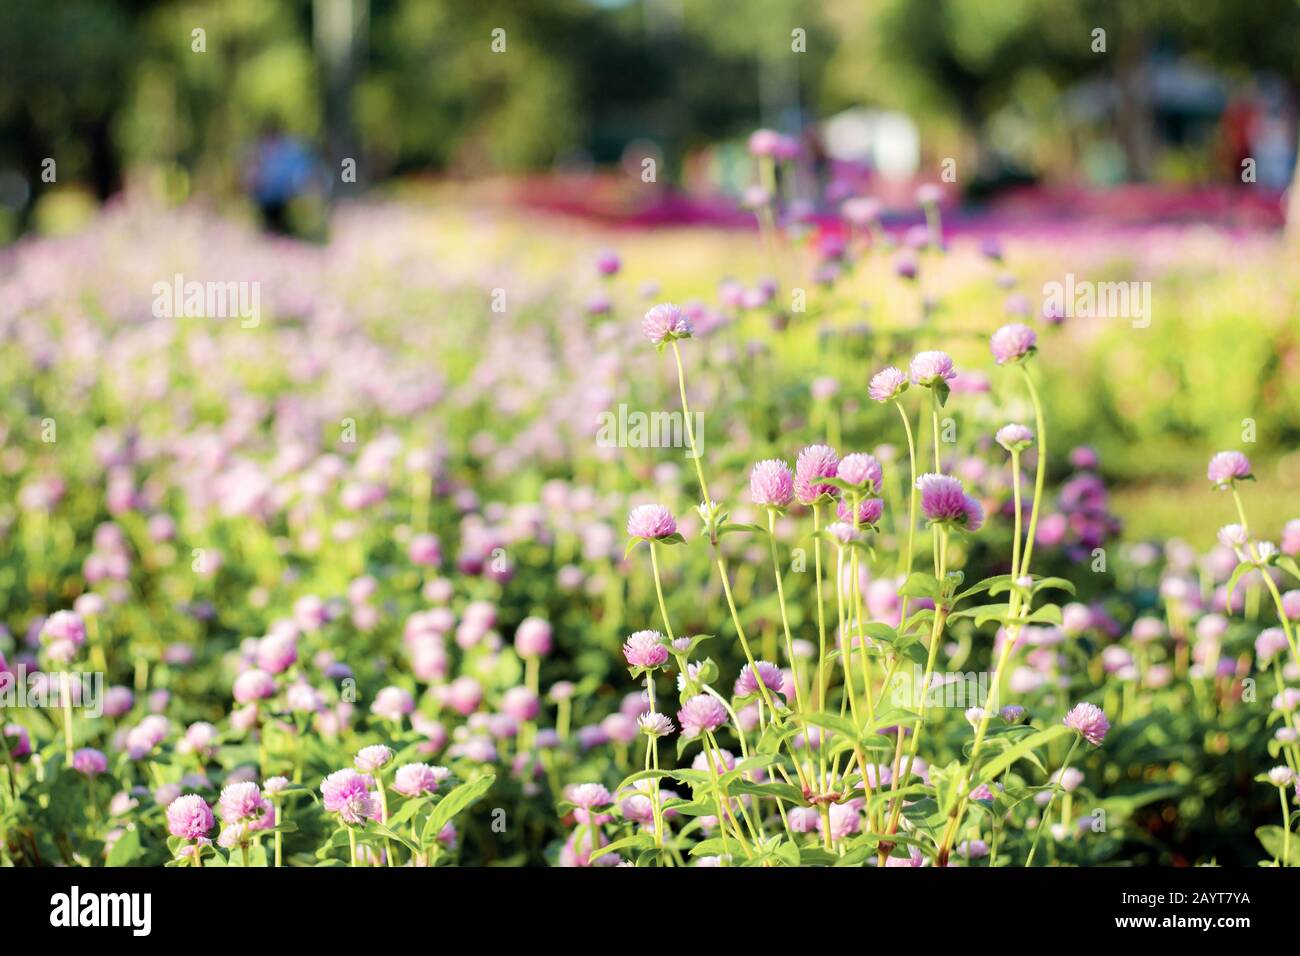 Pink flower on ploted in the garden. Stock Photo